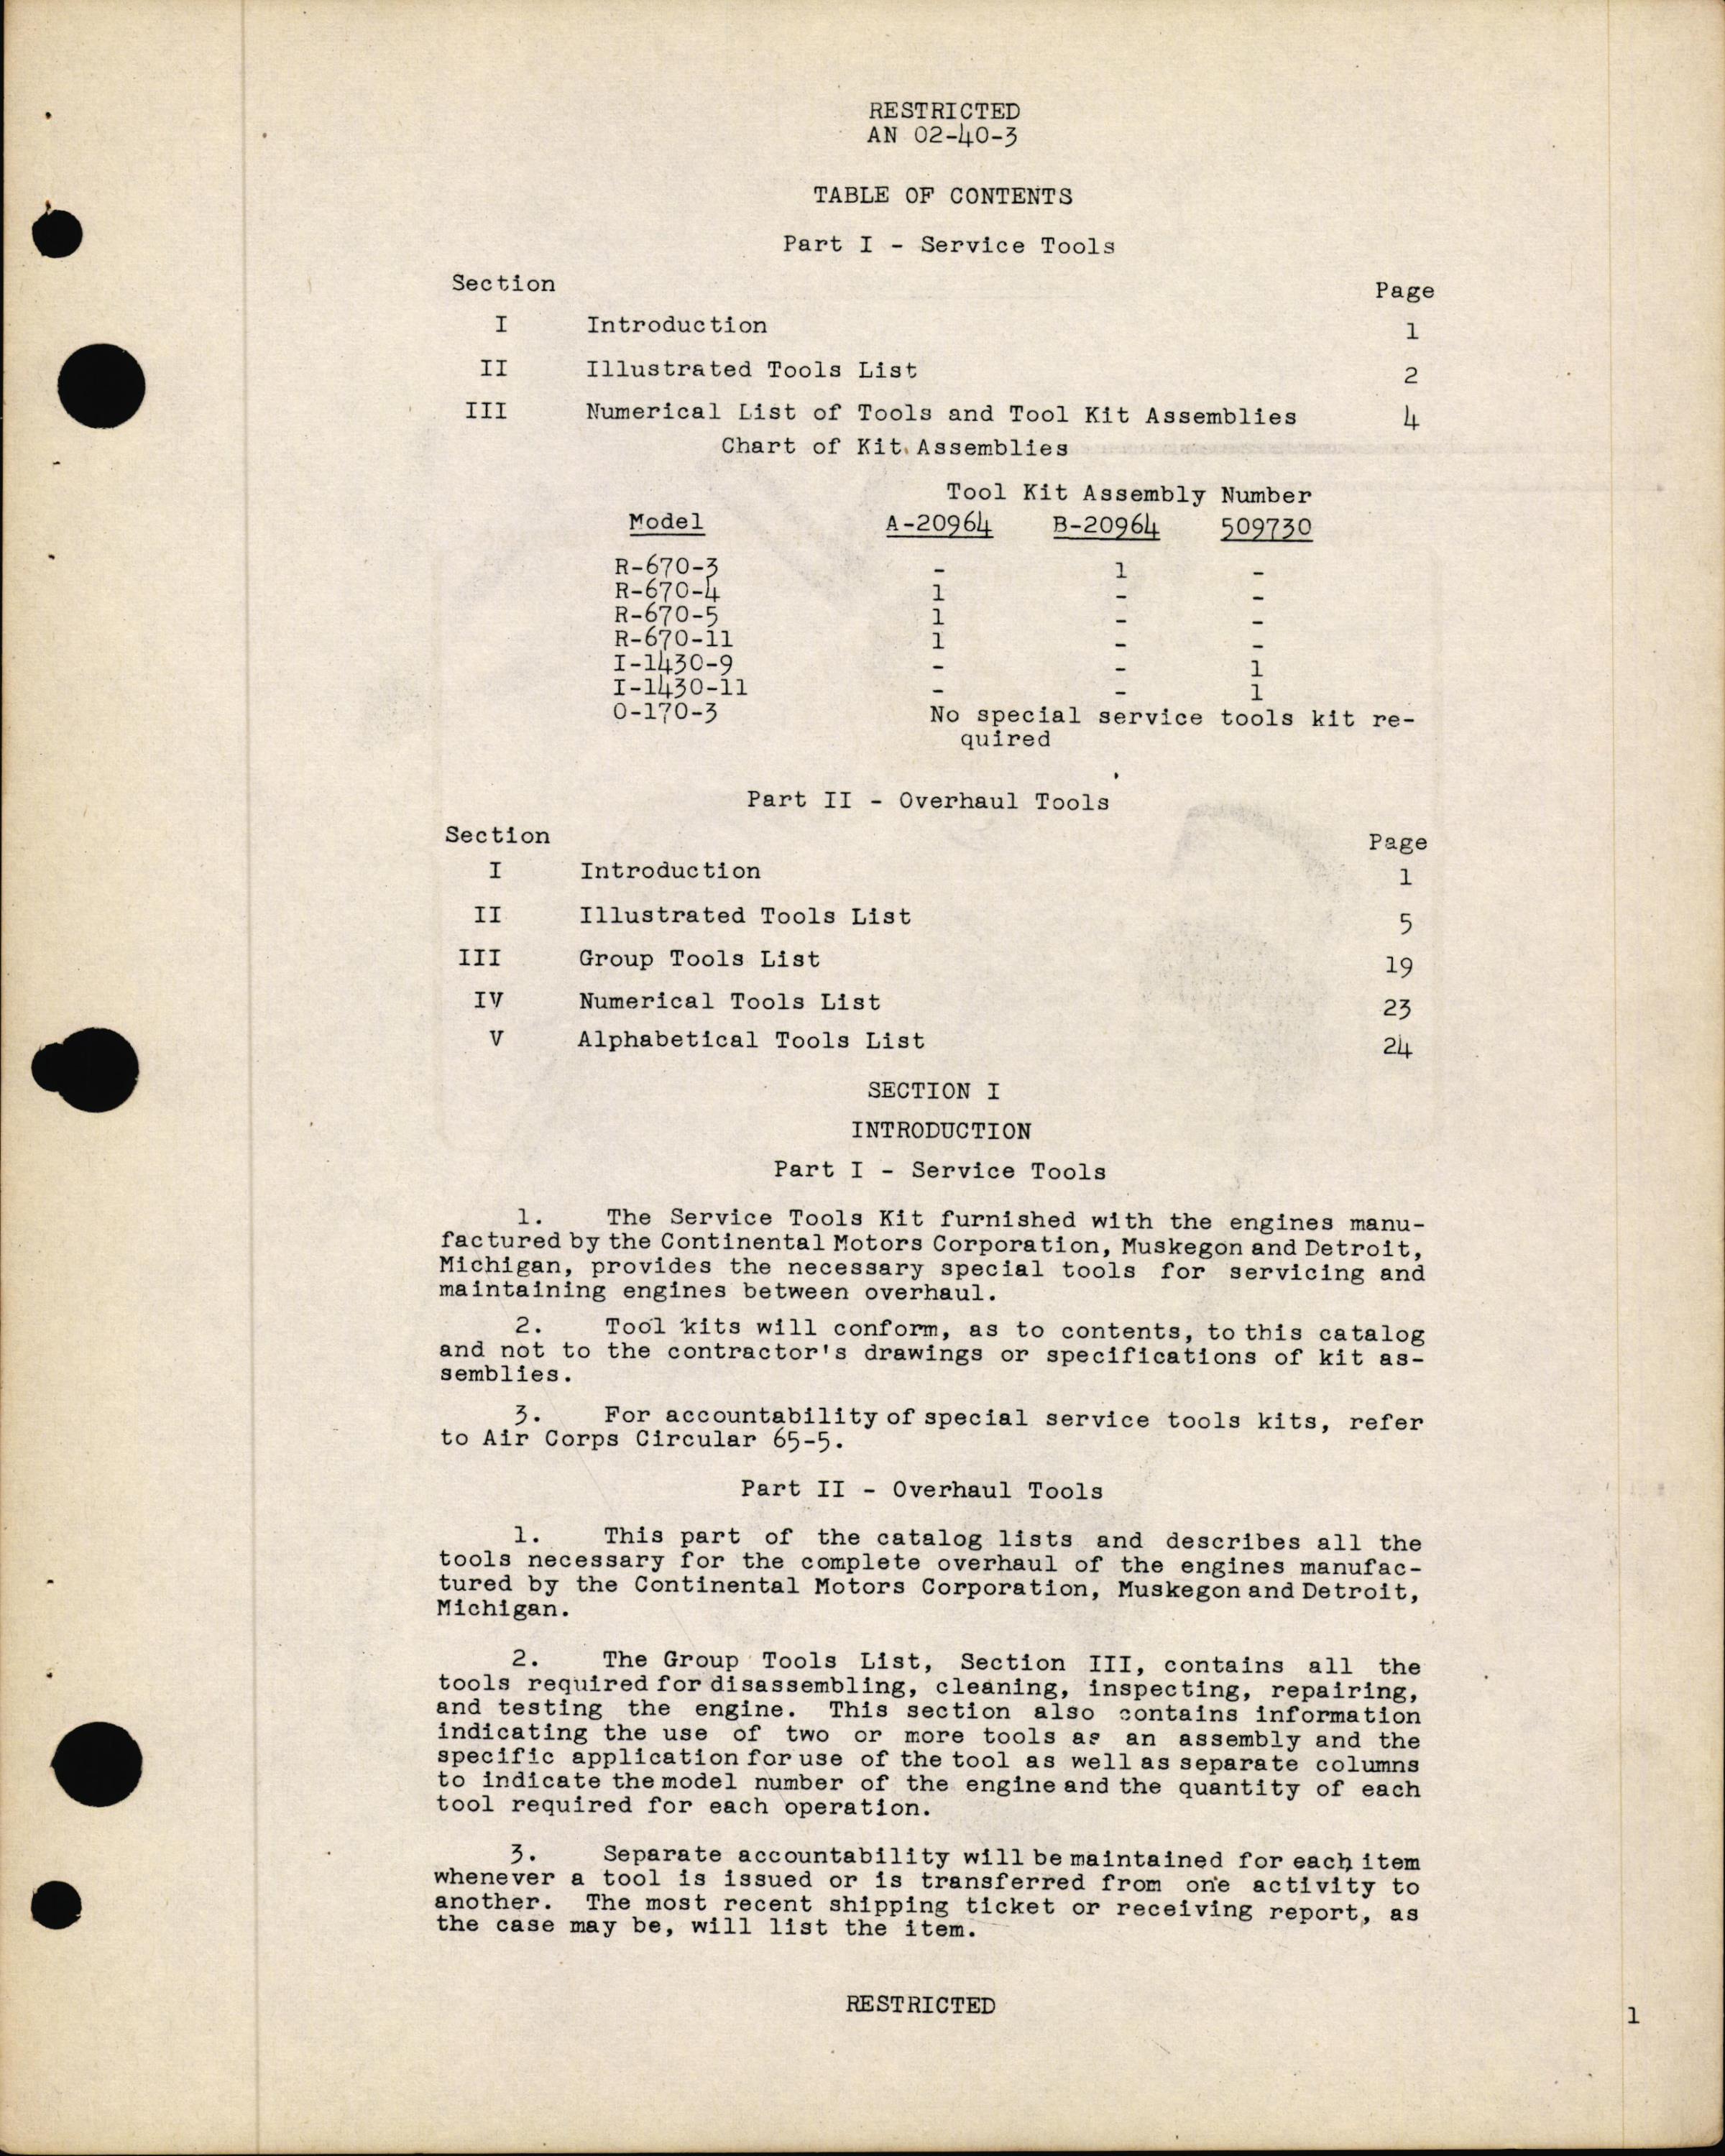 Sample page 4 from AirCorps Library document: Tools Catalog for Aircraft Engines